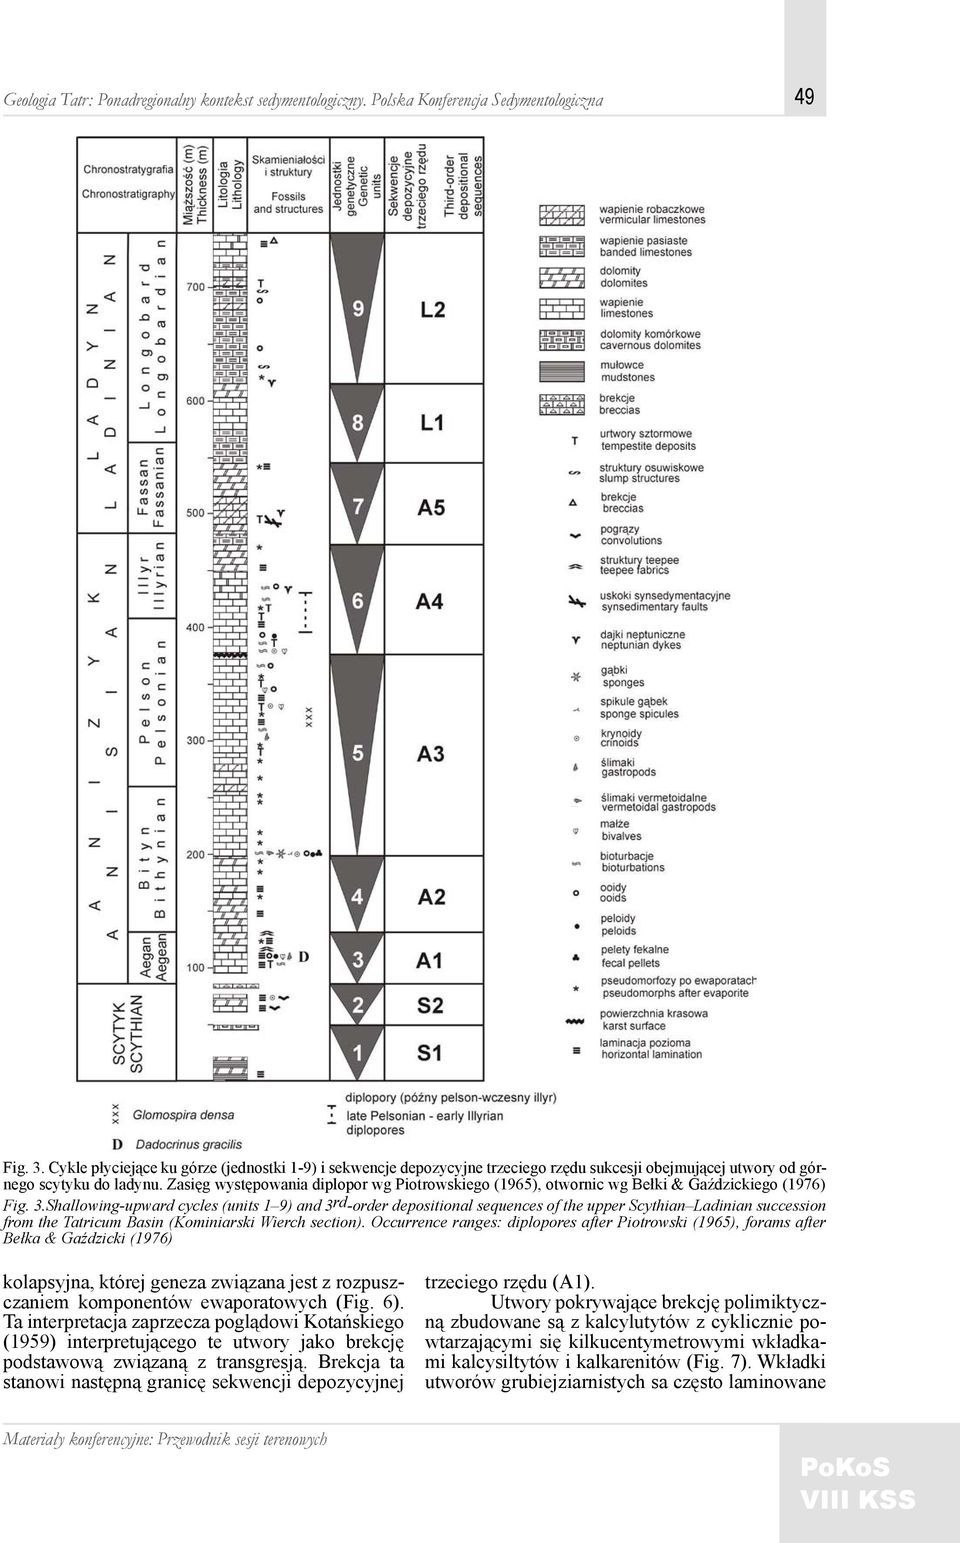 Shallowing-upward cycles (units 1 9) and 3rd-order depositional sequences of the upper Scythian Ladinian succession from the Tatricum Basin (Kominiarski Wierch section).